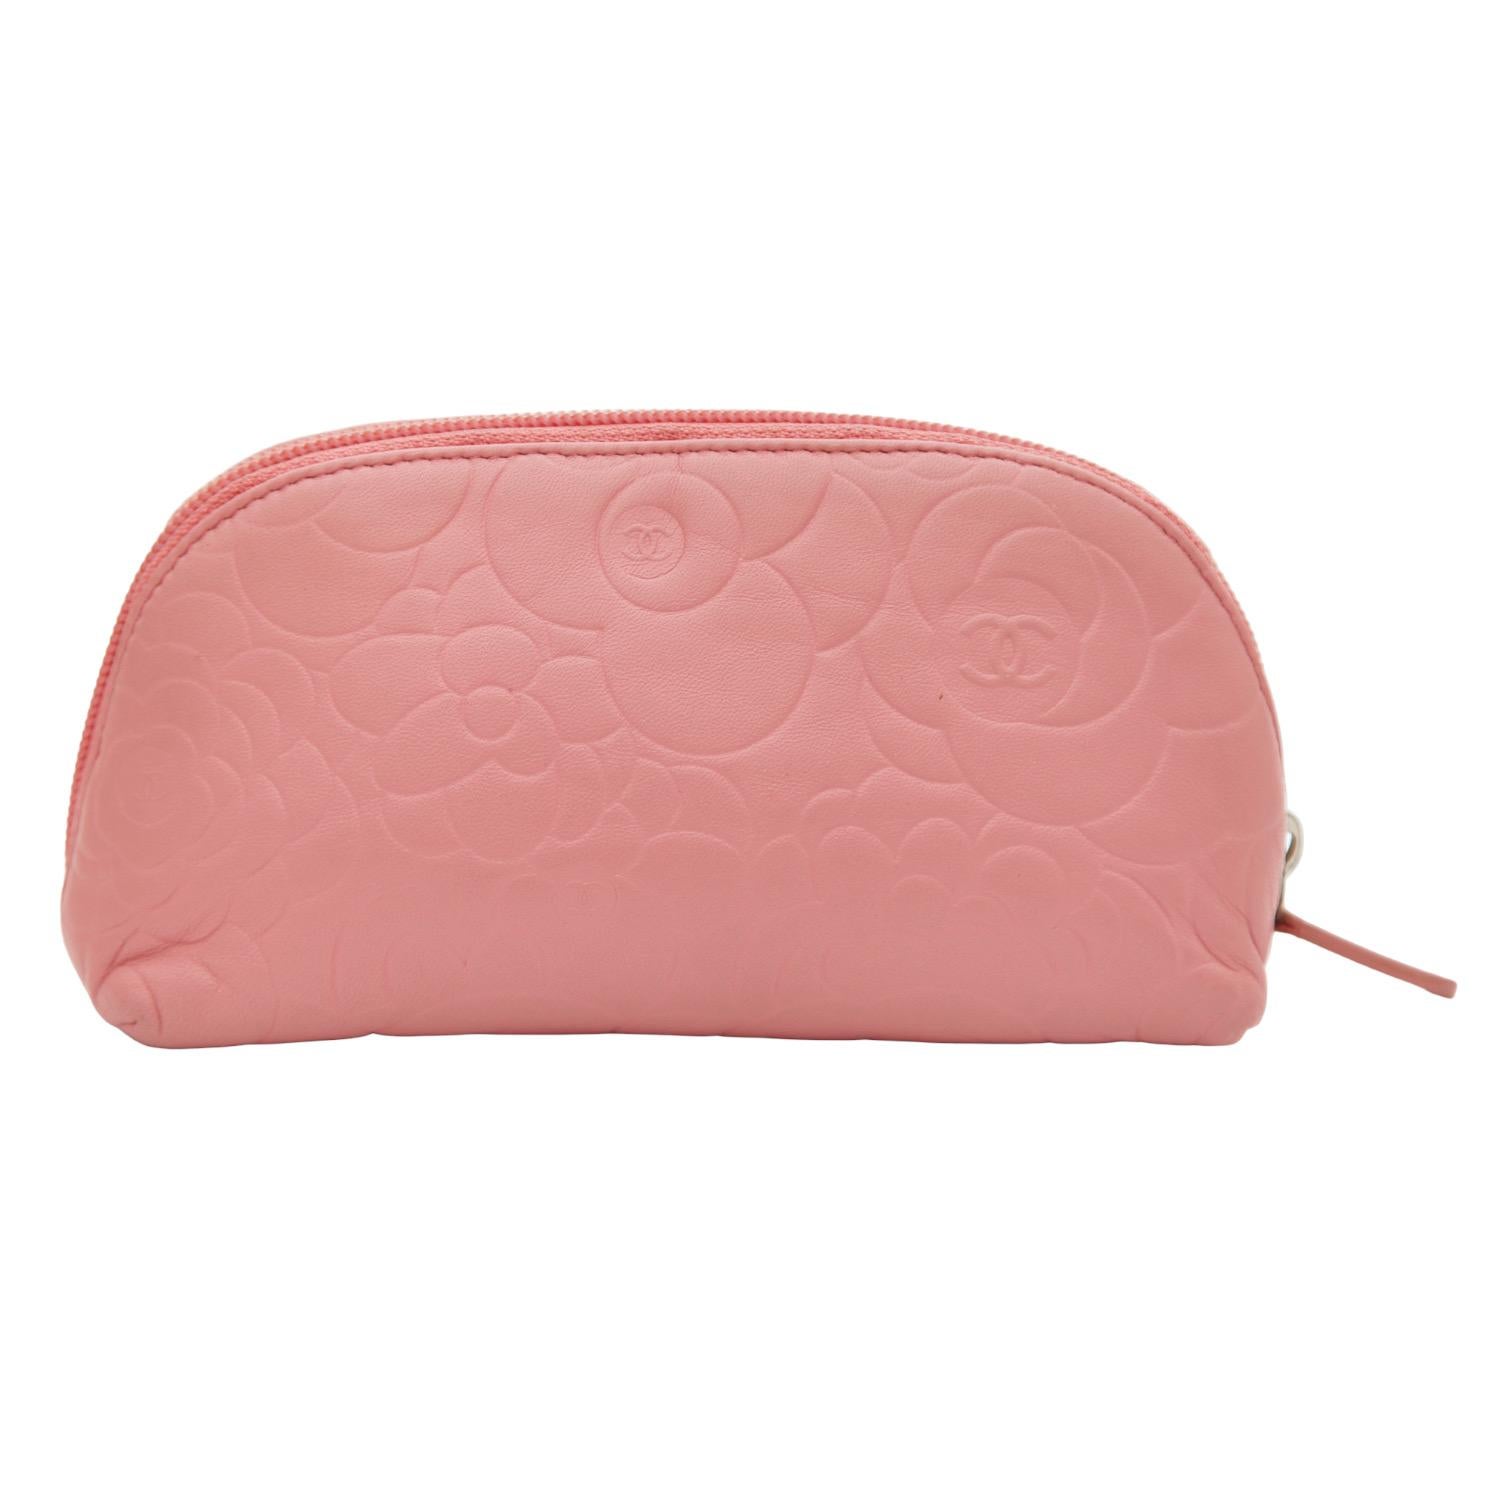 GUARANTEED AUTHENTIC CHANEL PINK LAMBSKIN LEATHER COSMETIC POUCH


Design: 
  - Pink lambskin leather exterior.
   - Camellia embossed print.
  - Silver-tone CC logo at front.
  - Zip around closure.
  - Interior lined in pink textile.
  - Interior